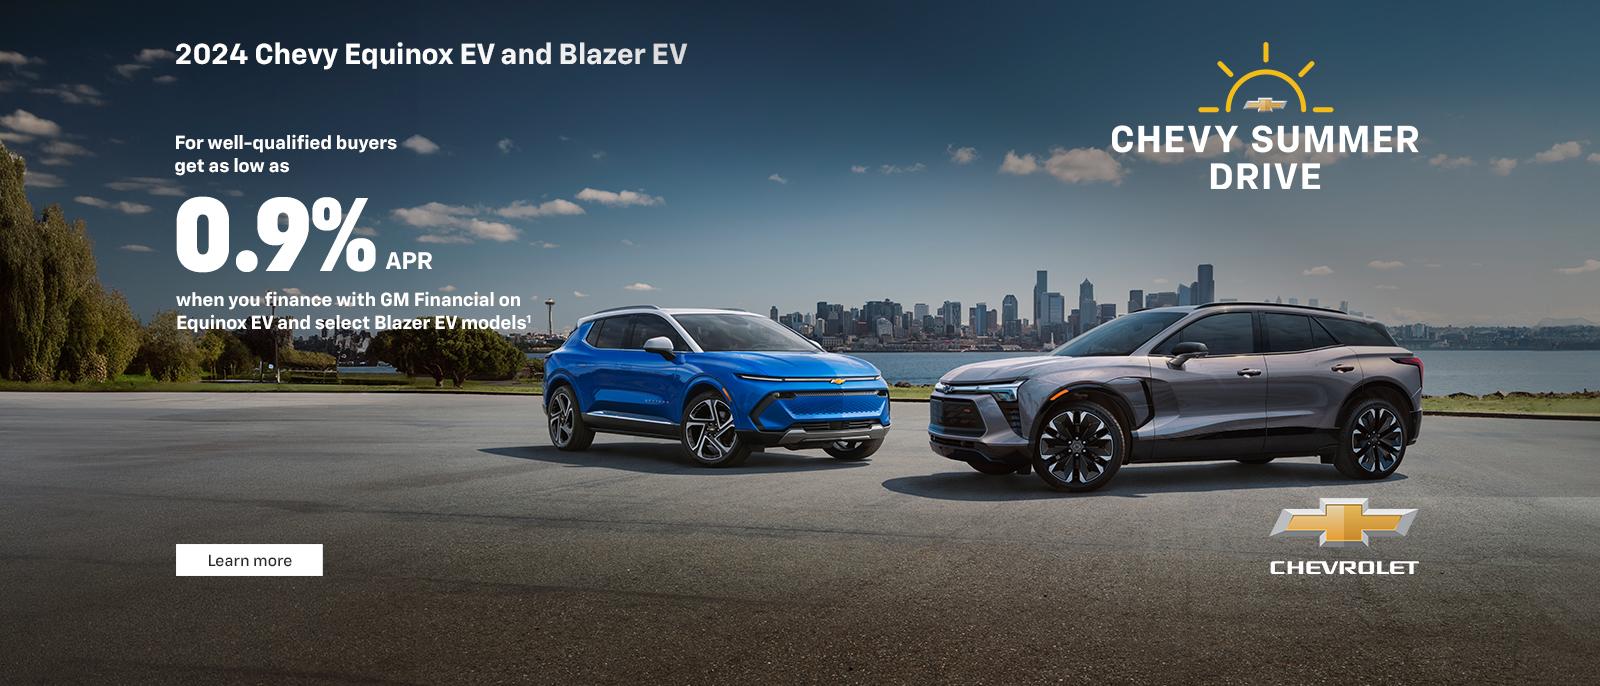 2024 Chevy Equinox EV and Blazer EV. For well-qualified buyers get as low as. 0.9% APR. when you finance with GM Financial on Equinox EV and select Blazer EV models.